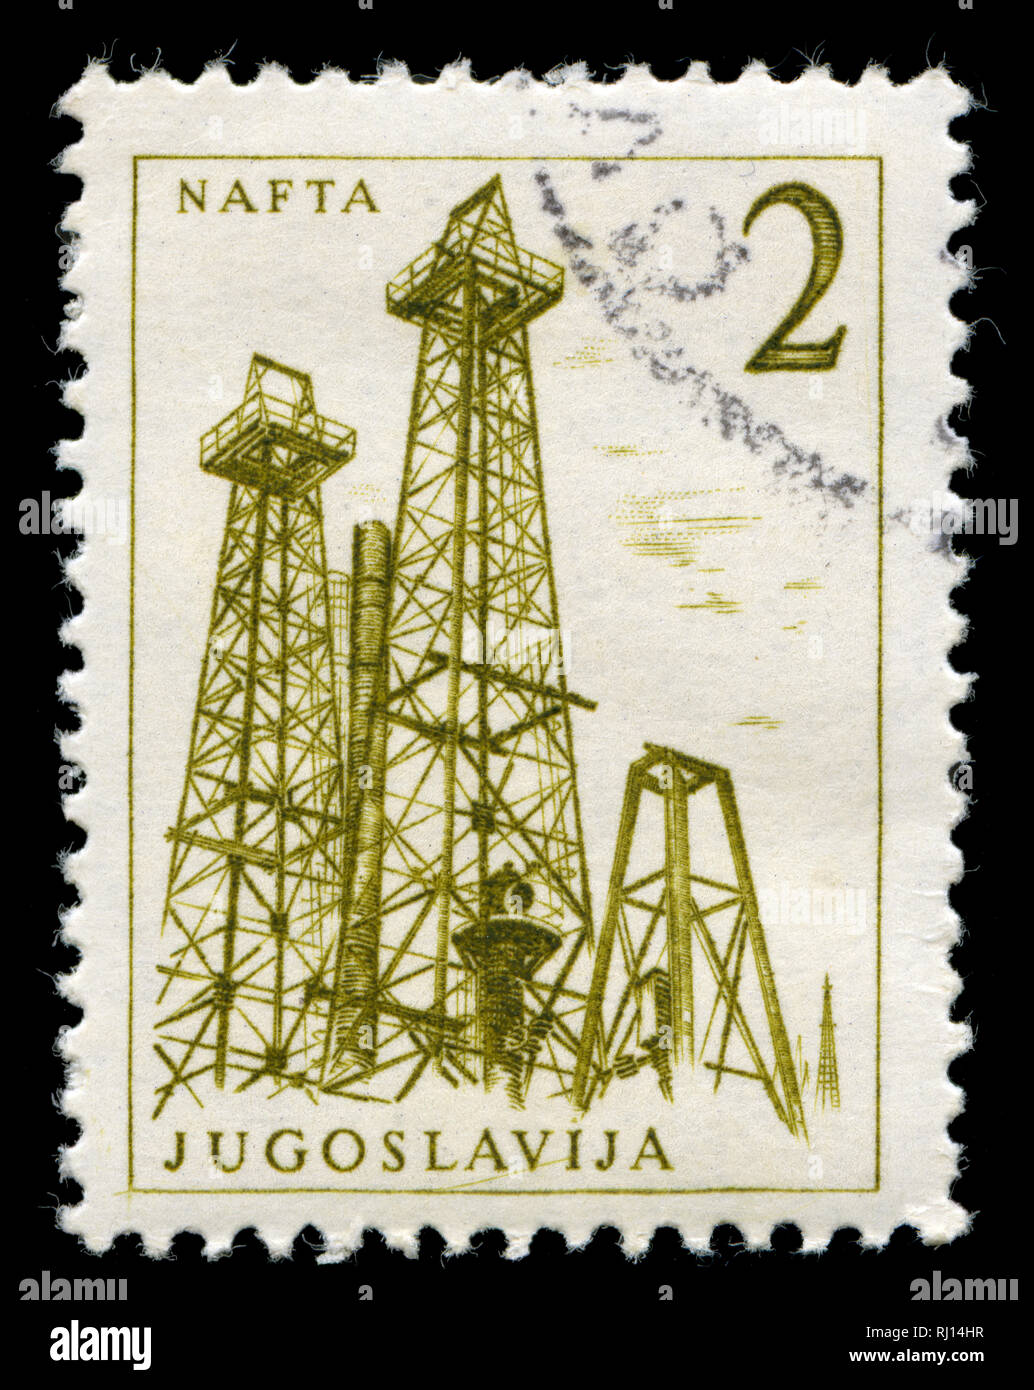 Postage stamp from the former state of Yugoslavia in the Engineering and Architecture series issued in 1958 Stock Photo